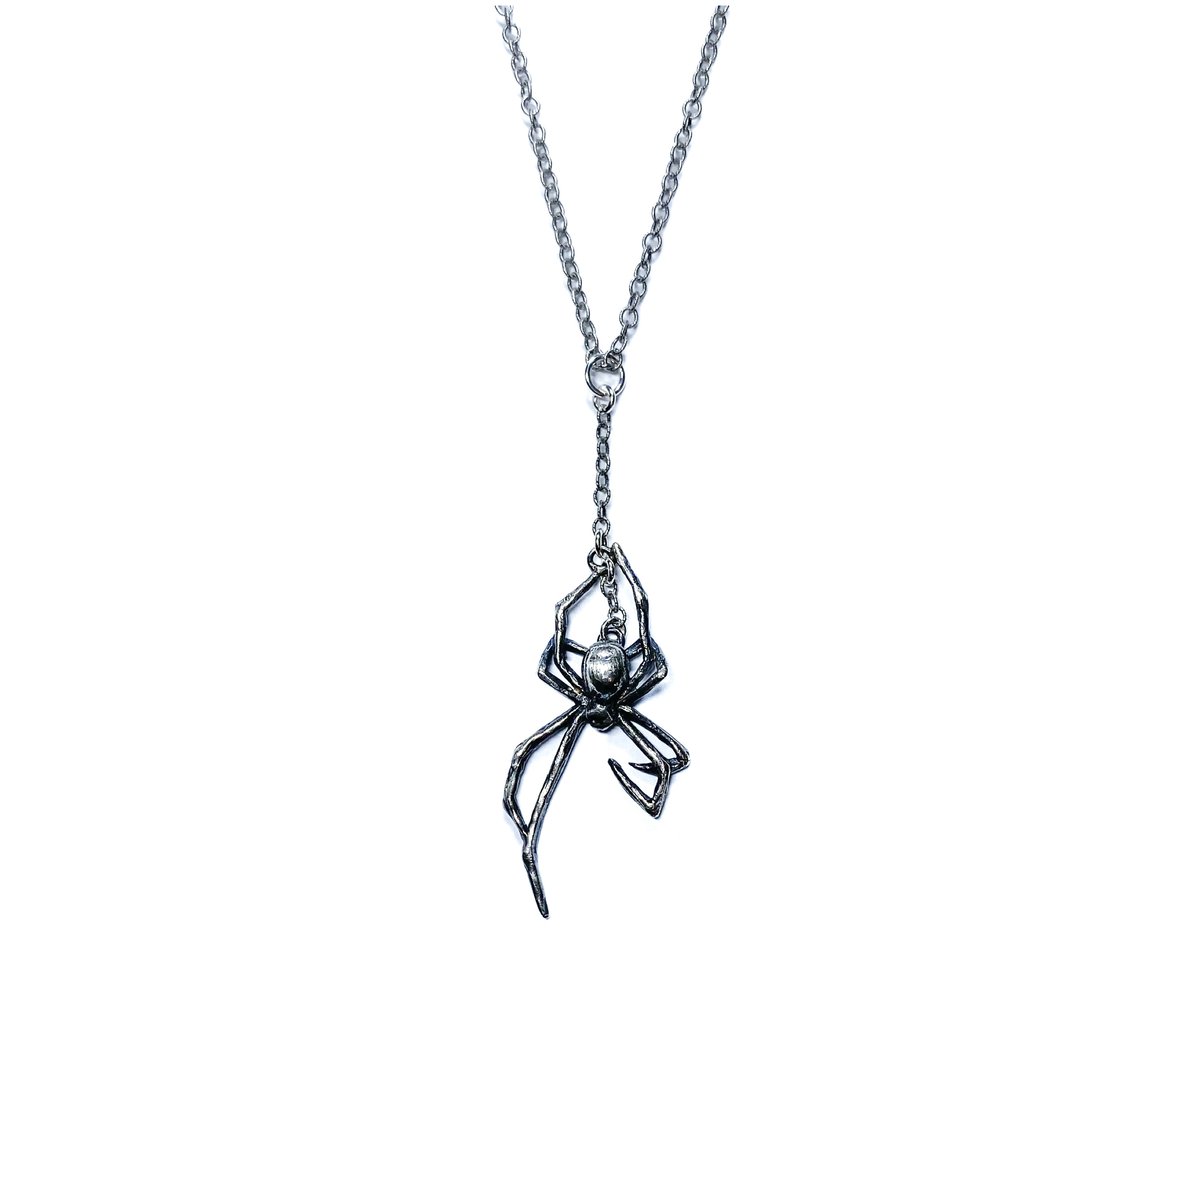 Black Veil + AO Mini Spider necklace in sterling silver or gold